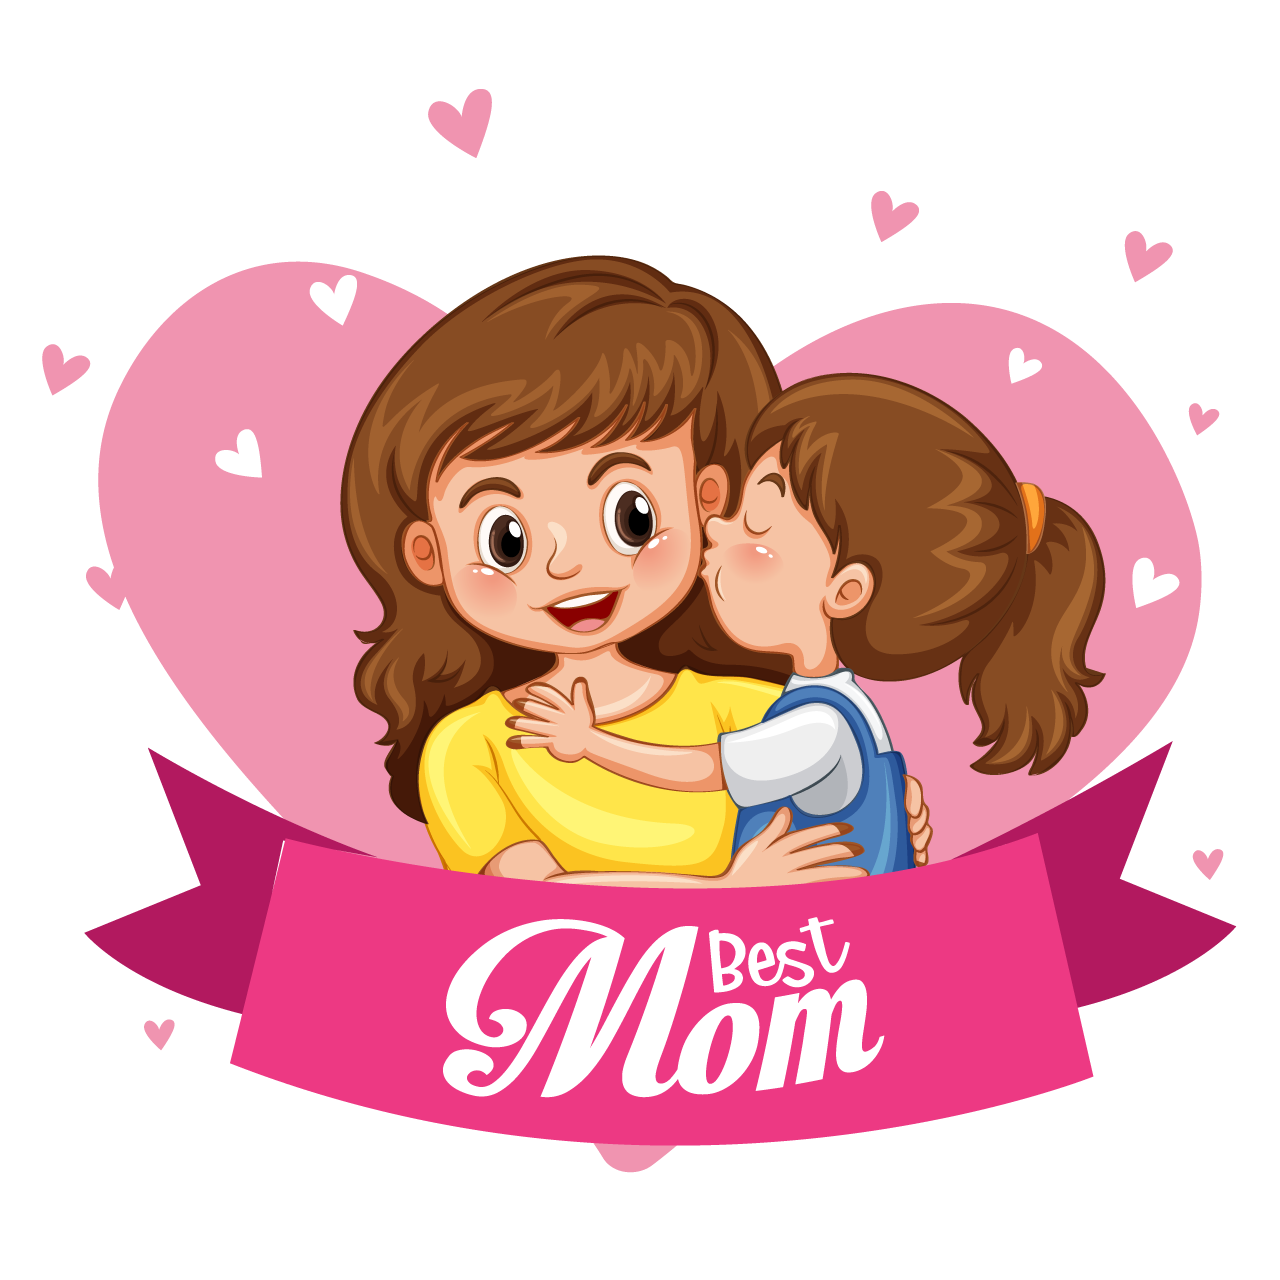 Happy mother day cartoon illustration image hand drawing sketch